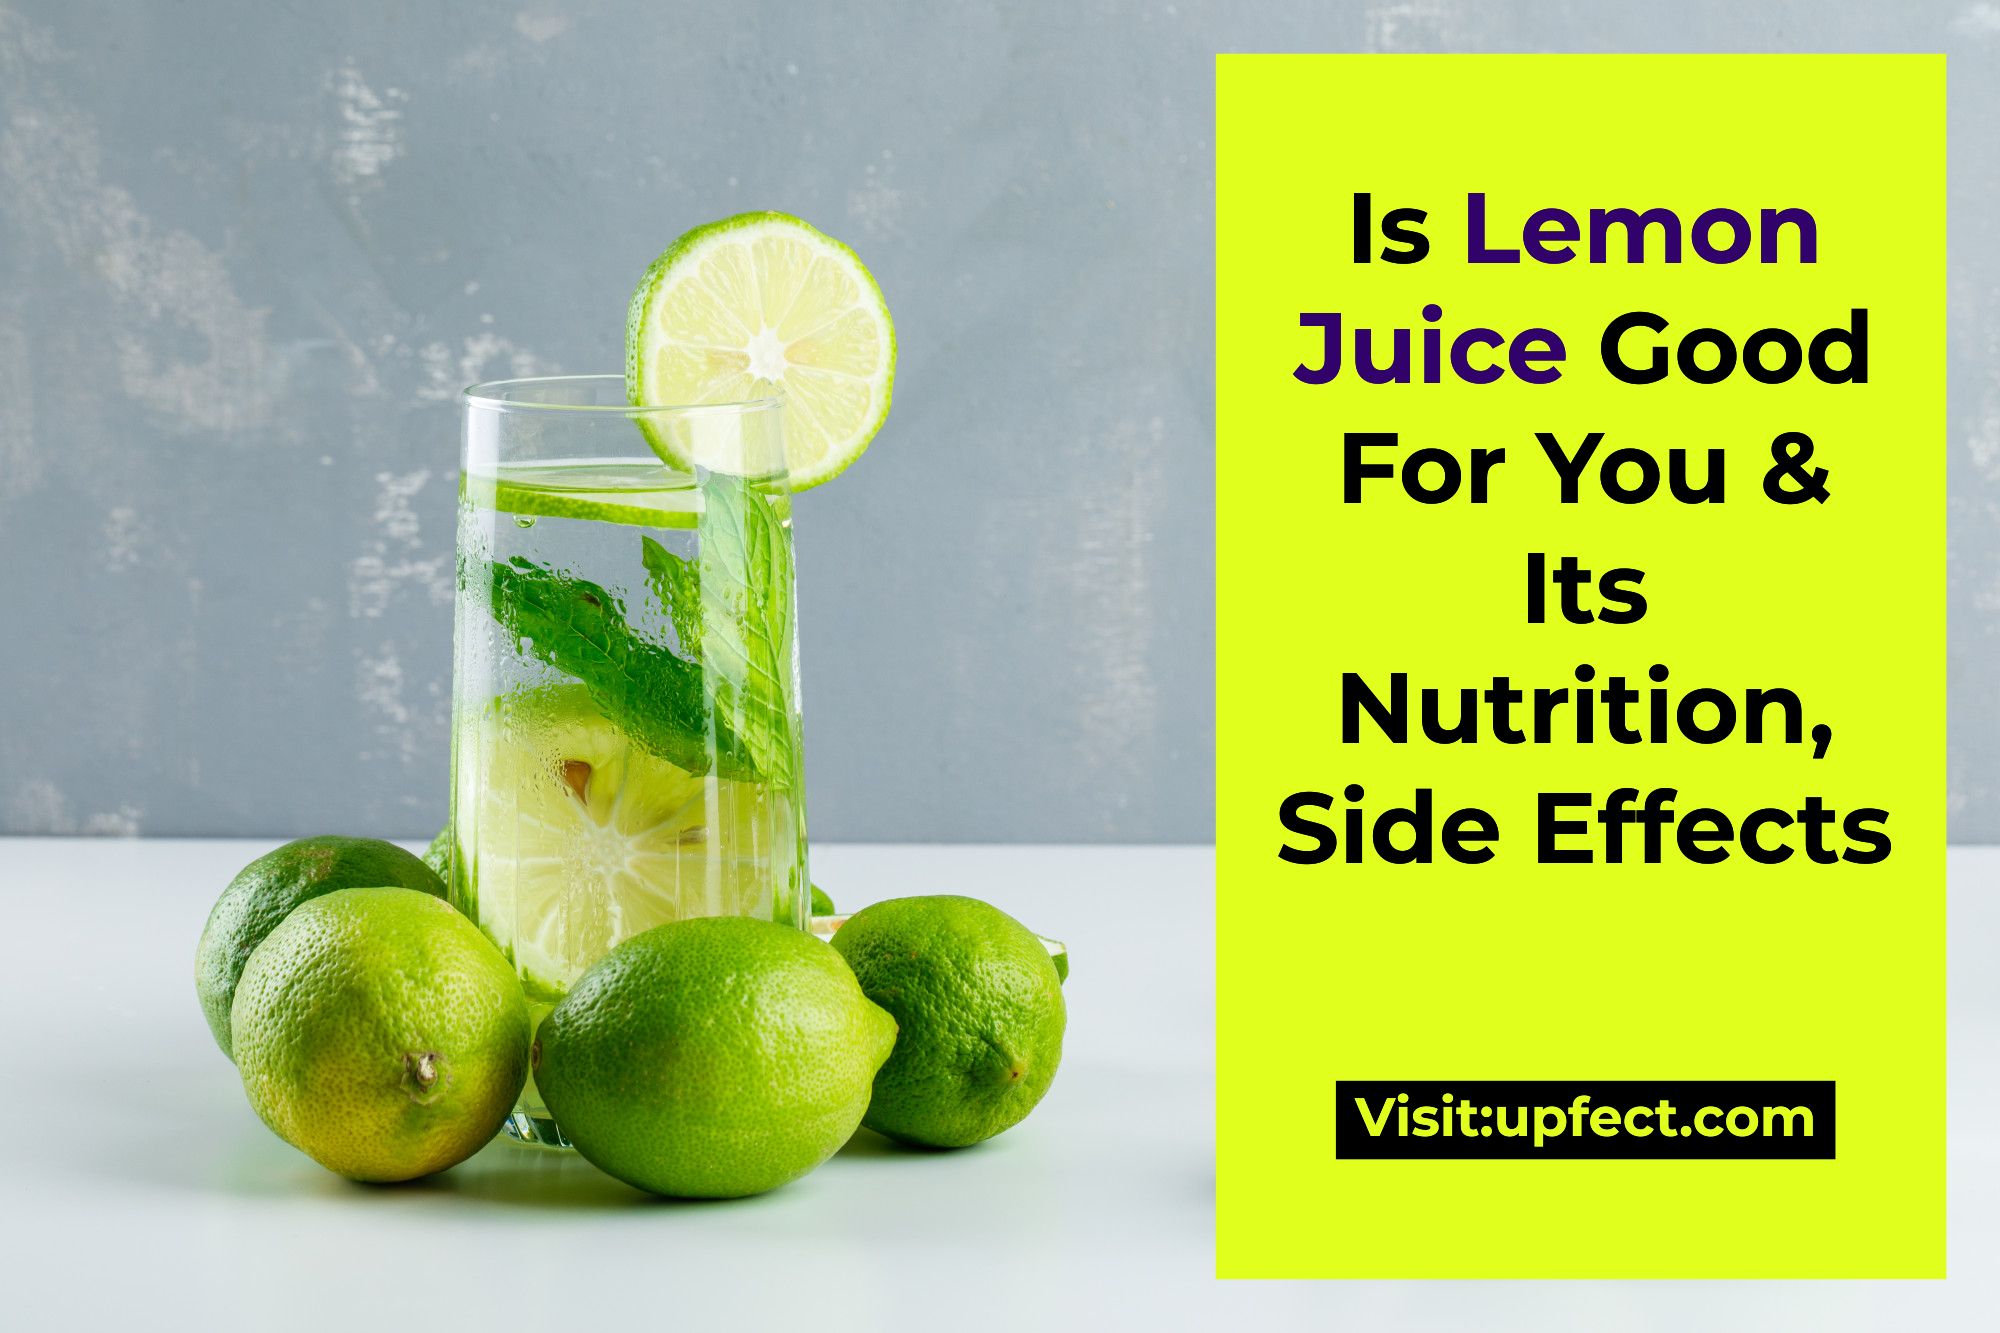 Is Lemon Juice Good For You